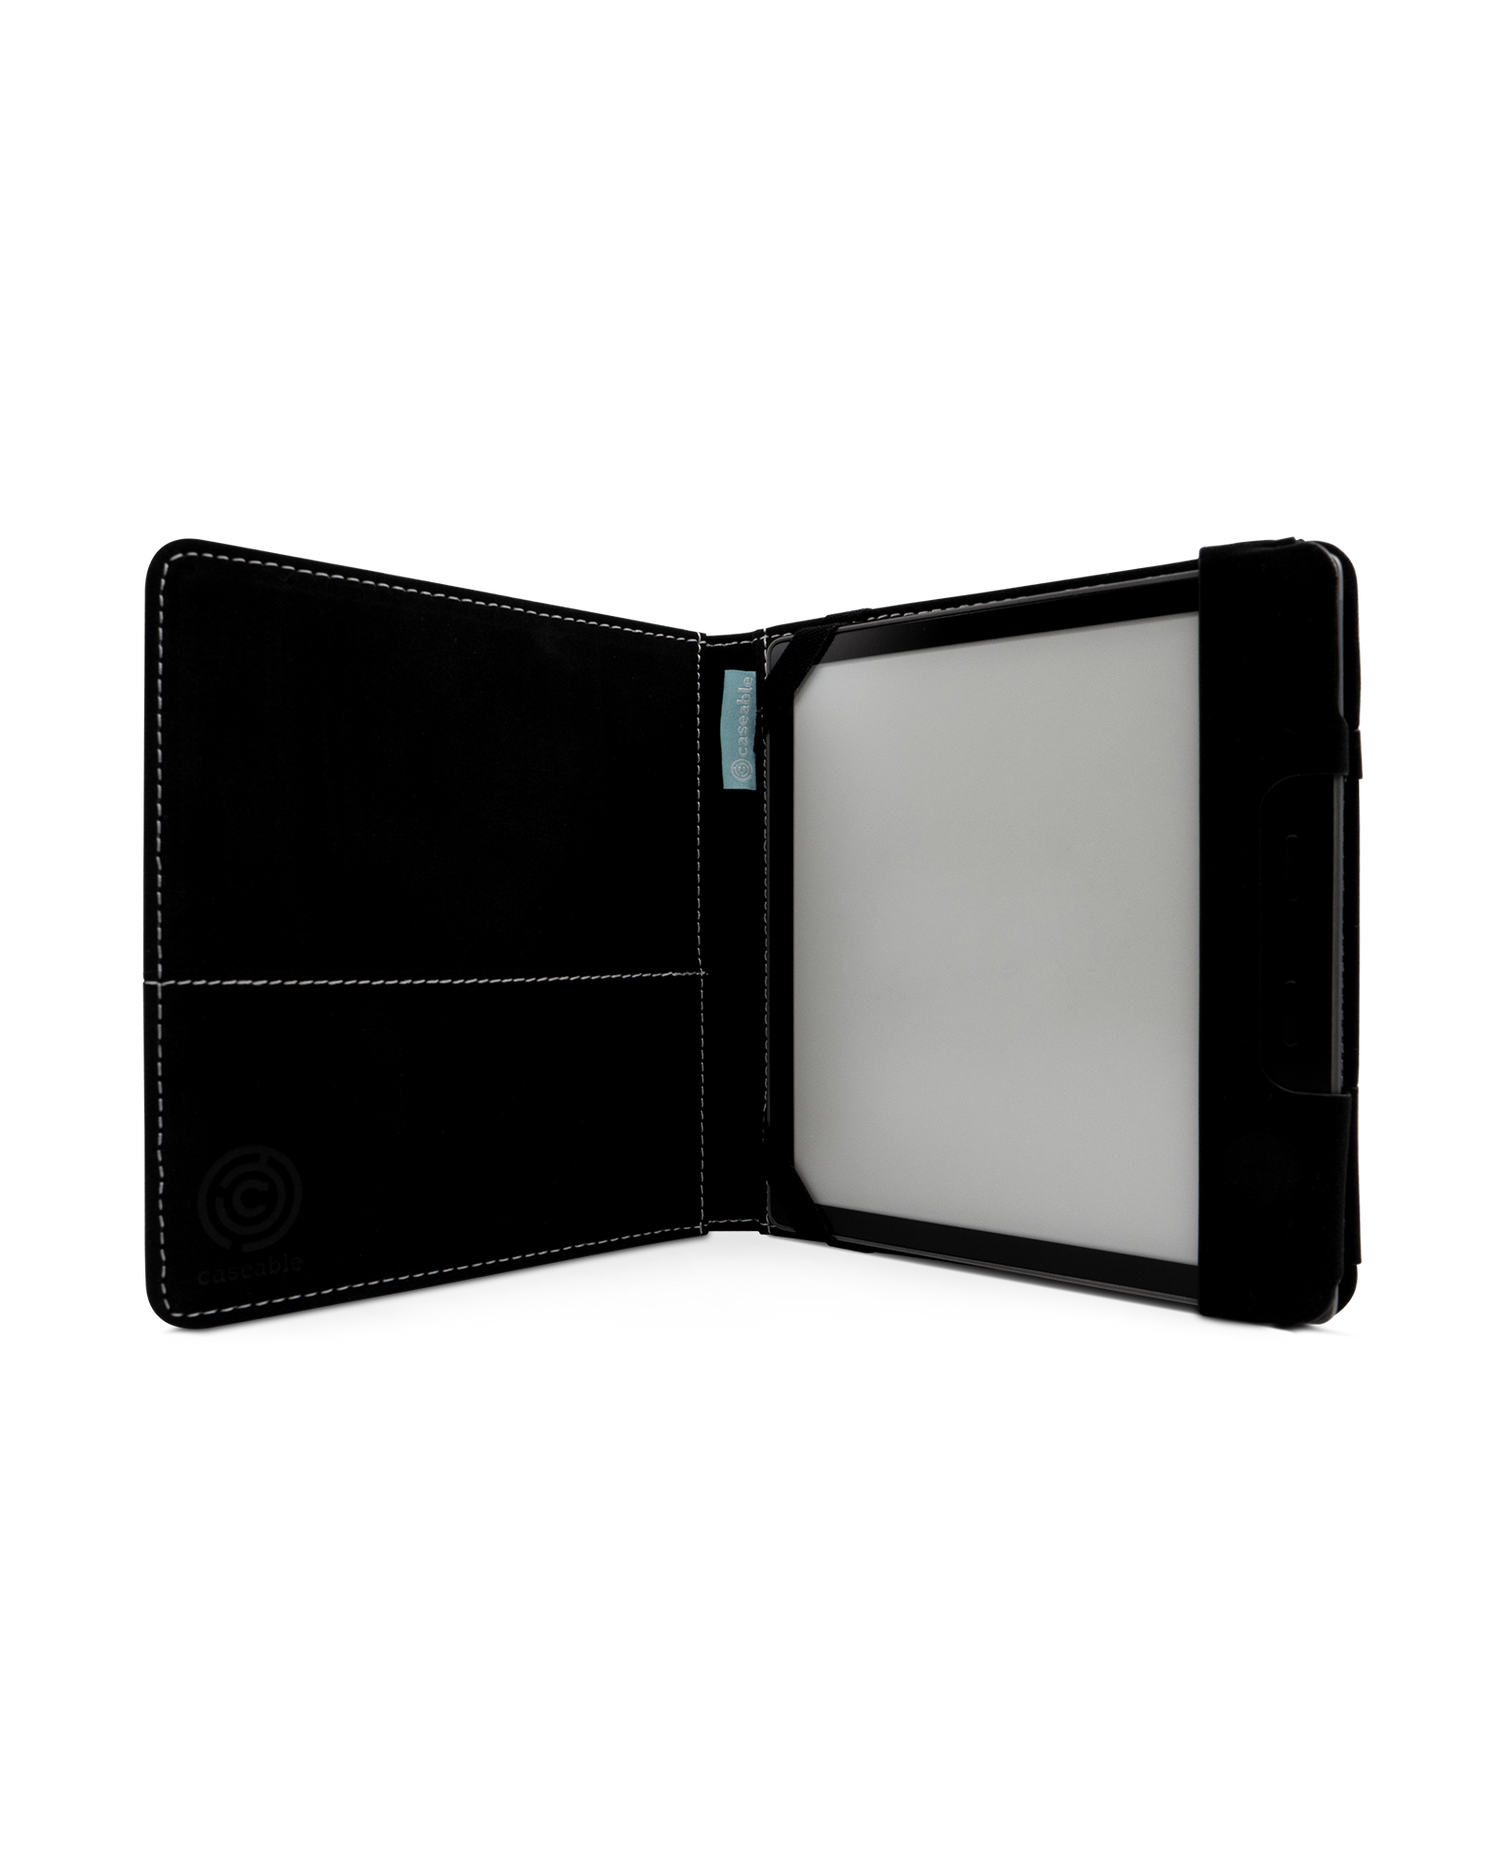 NAVY eReader Case for tolino vision 6: Opened interior view